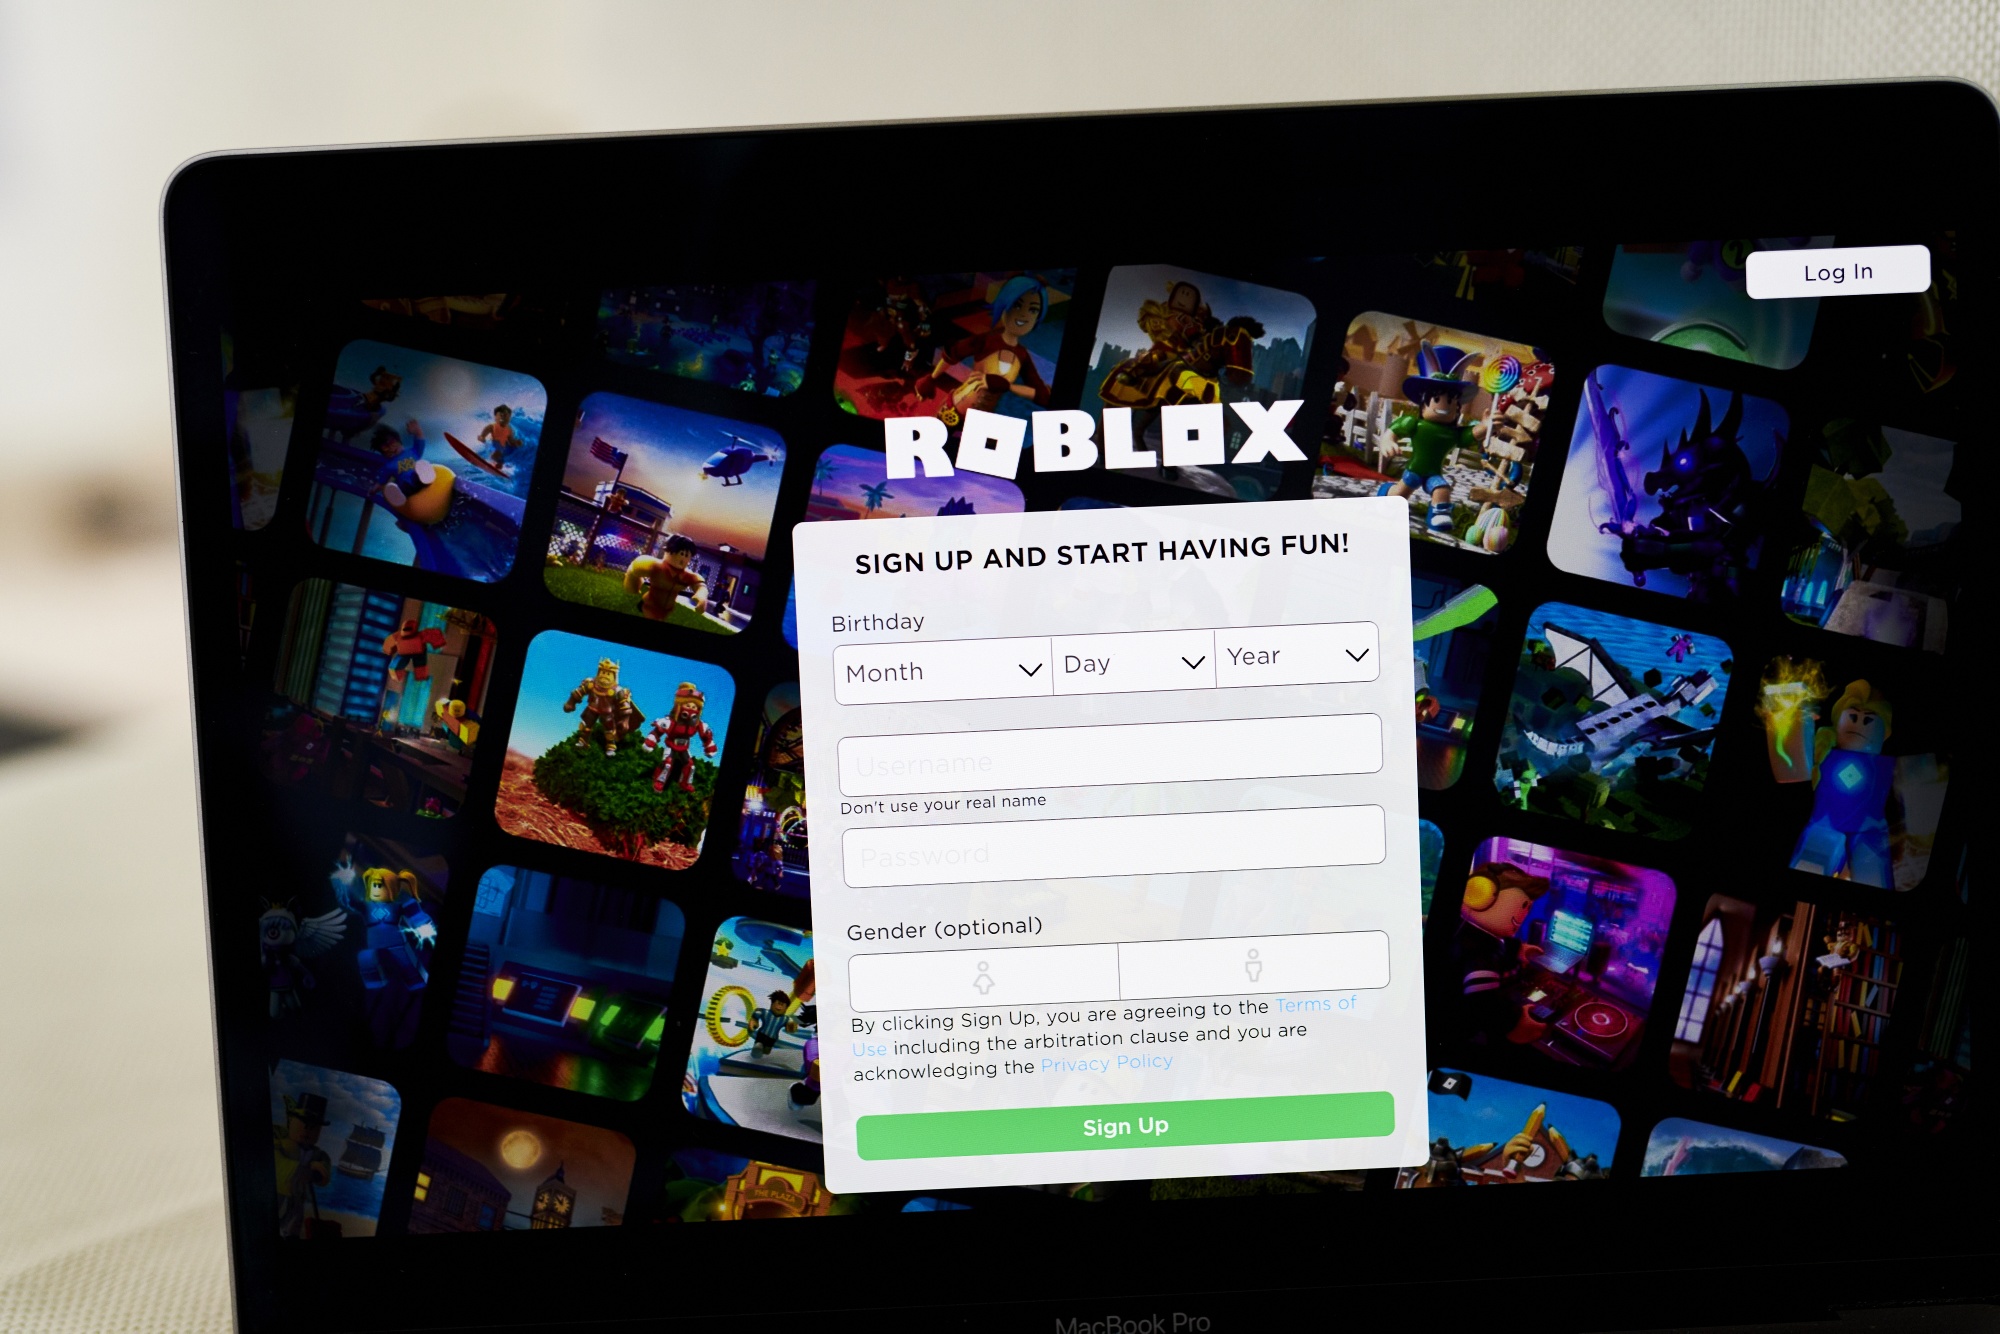 Watchdog group says kids vulnerable to inappropriate content on popular  game Roblox - Good Morning America